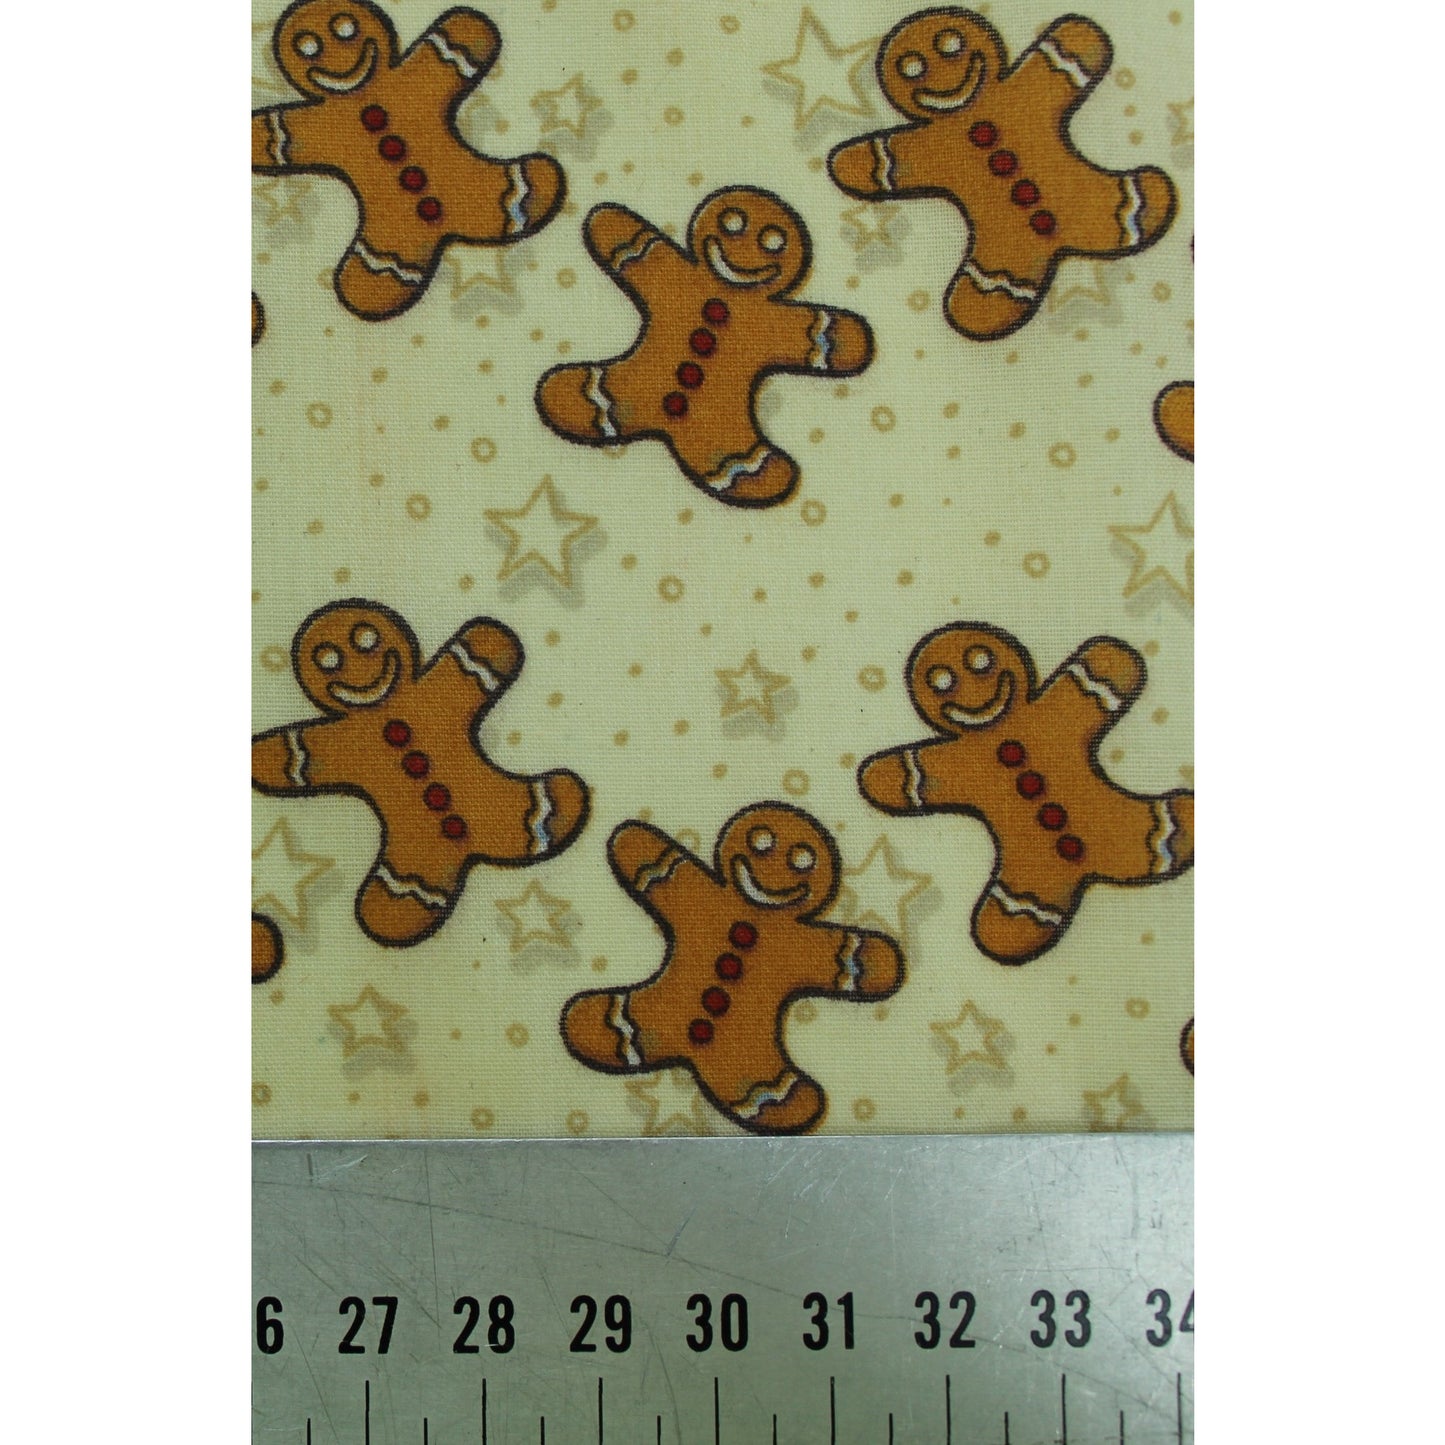 smiling gingerbread men in tan colour on a pale yellow background with stars and dots polycotton fabric